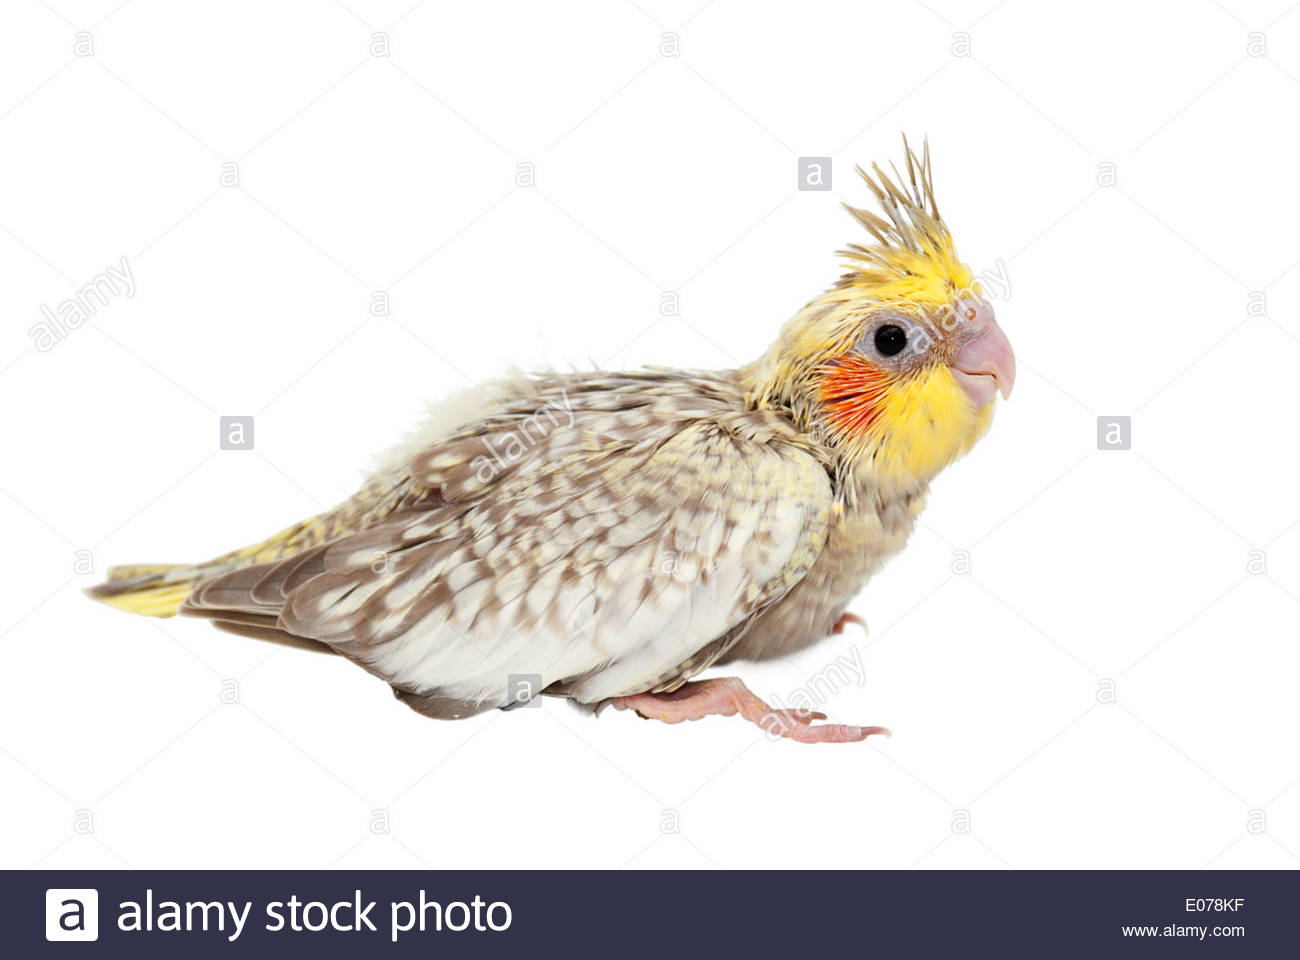 A Young Cockatiel Nymphicus Hollandicus Bird Isolated On White